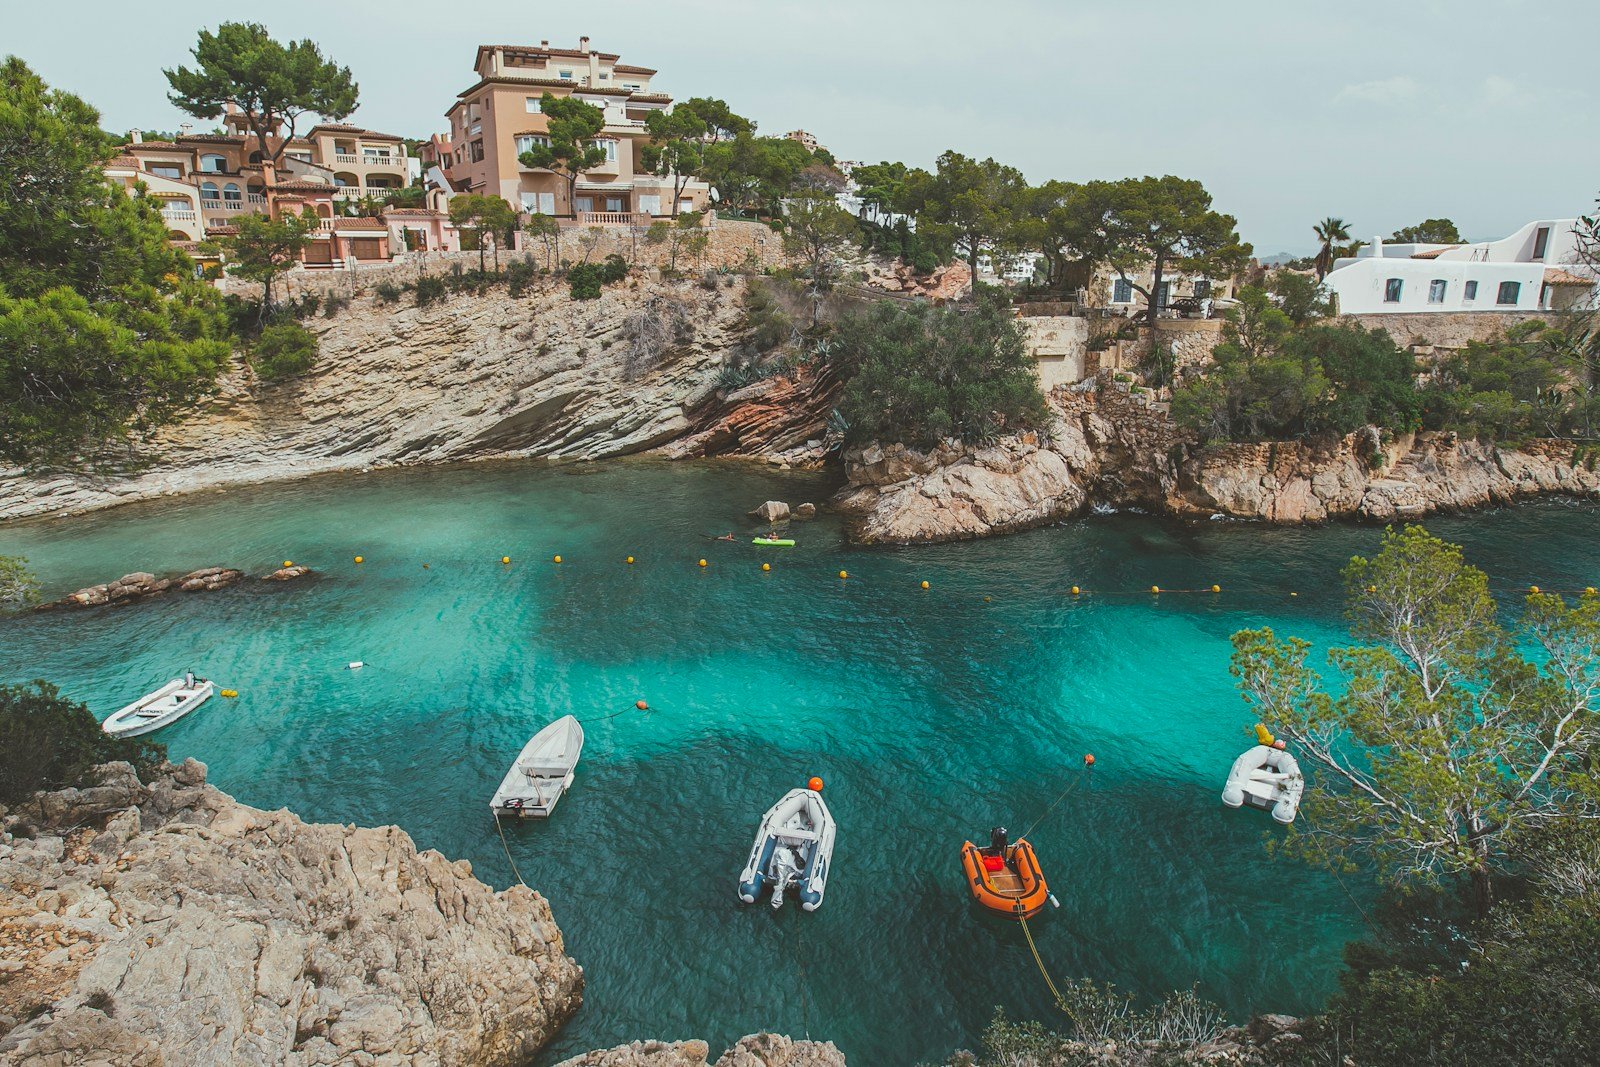 seo local para restaurantes en palma de mallorca - people in white and orange boat on water near brown rock formation during daytime